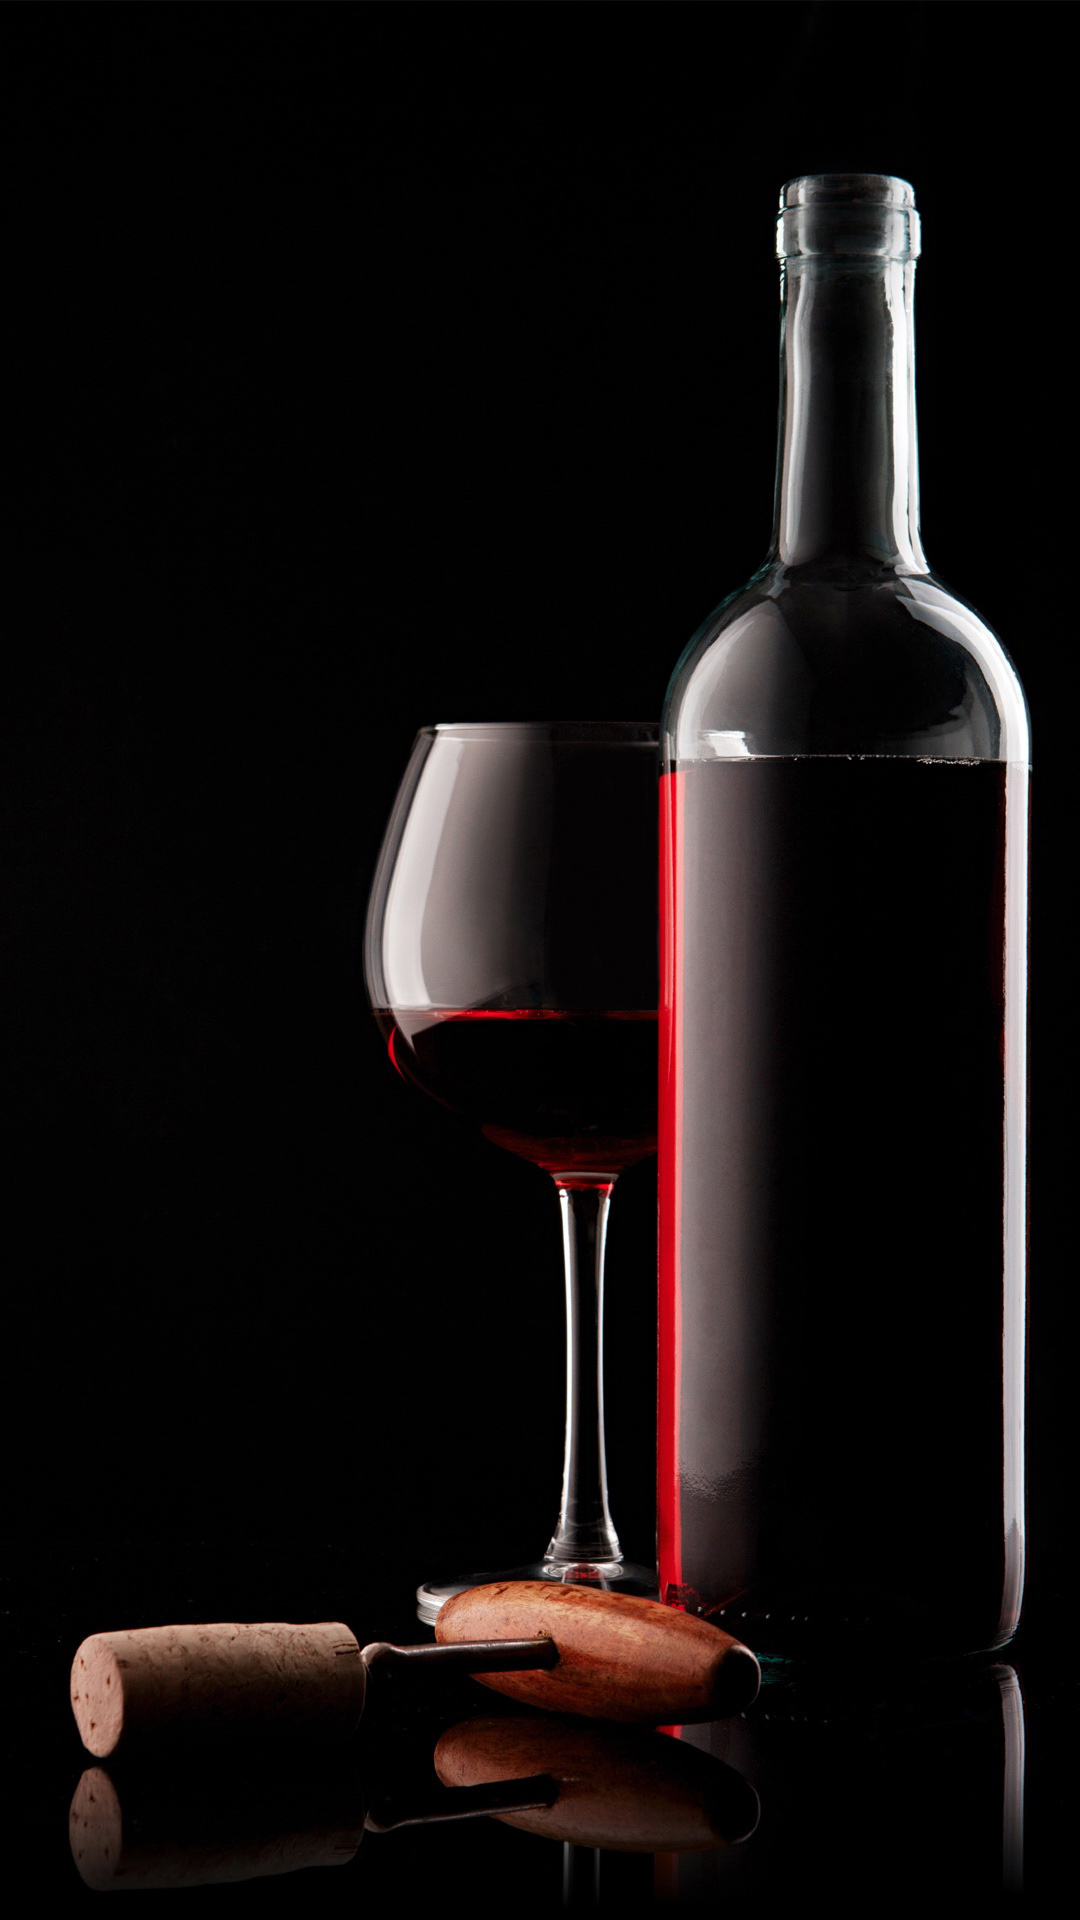 Love Wineglass Bottle Red Wine Android Wallpaper free download